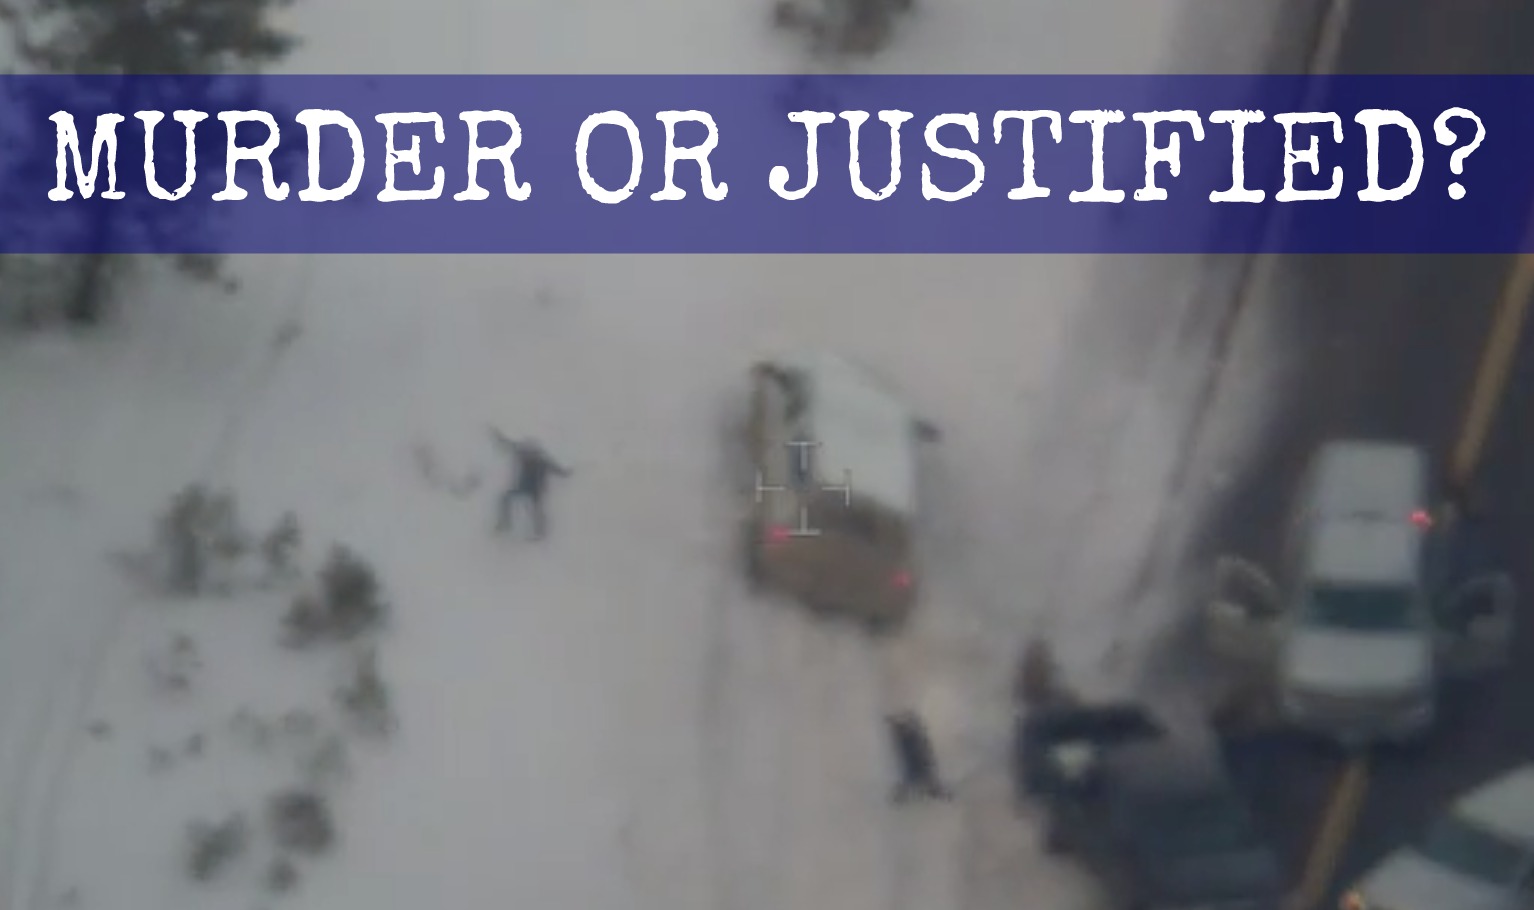 New slow-motion video shows LaVoy Finicum with hands up as bullets hit truck (VIDEO)